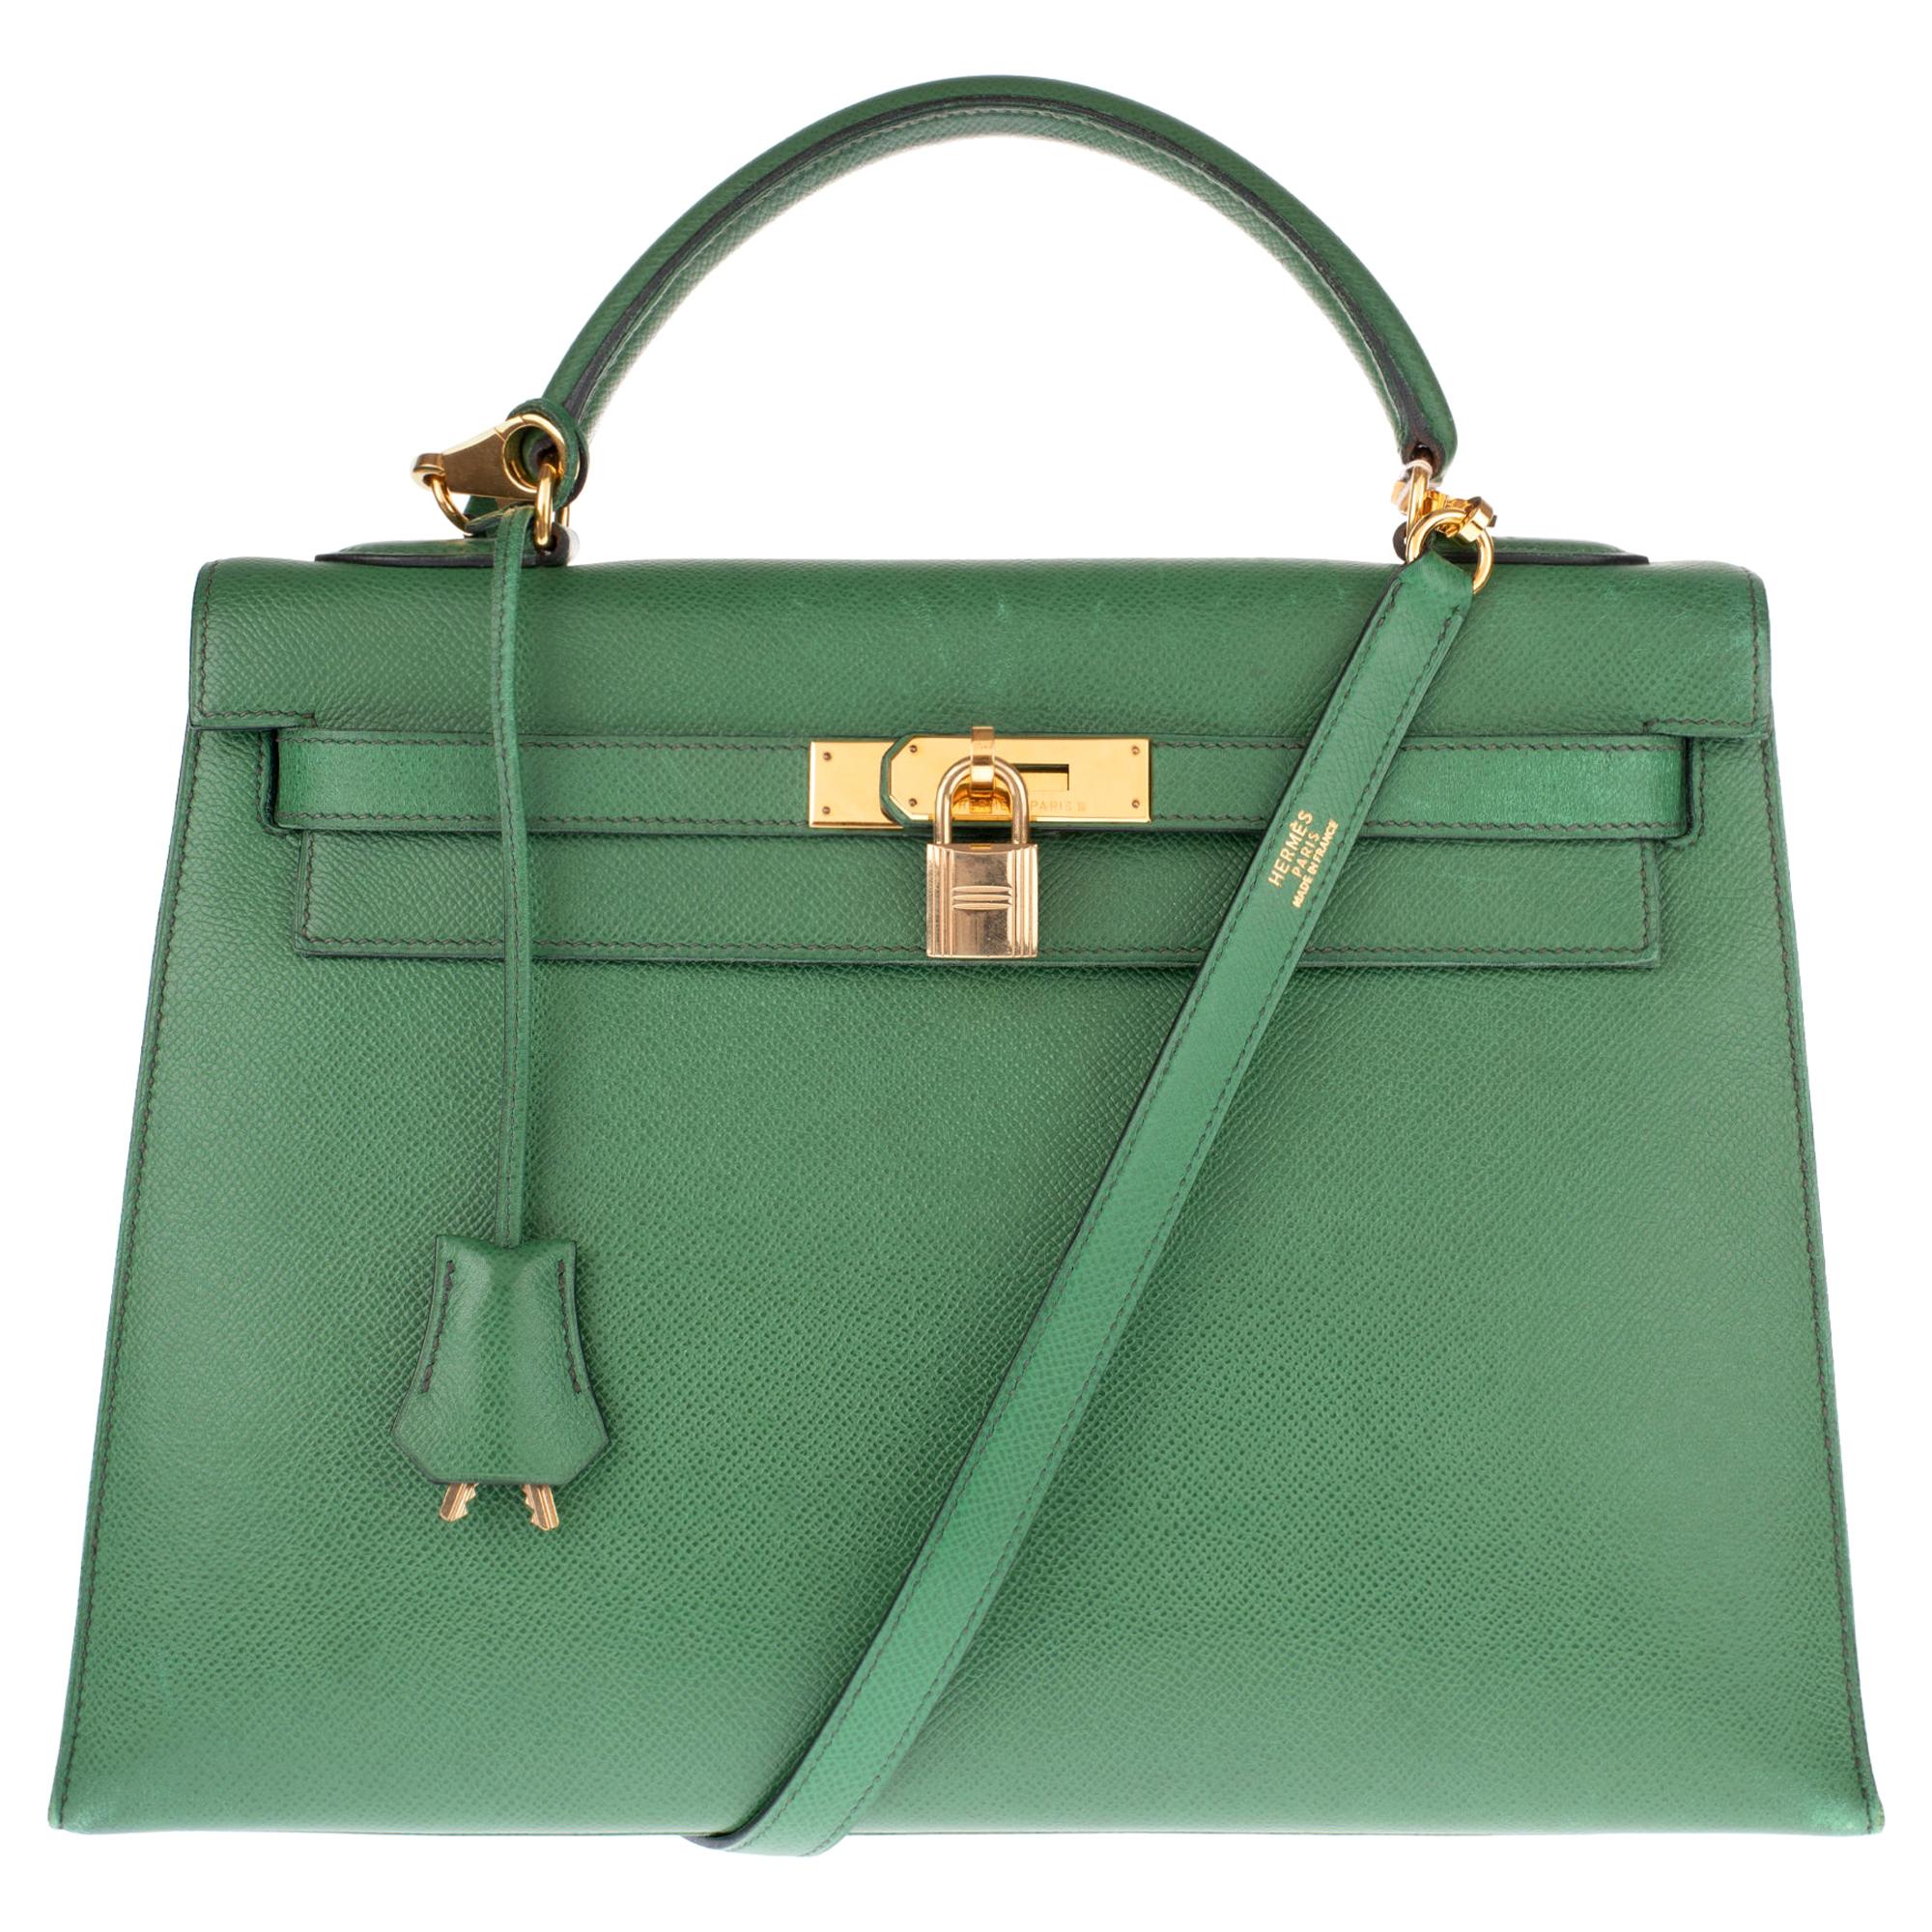 Amazing handbag Hermès Kelly 32 sellier with strap in green courchevel leather !